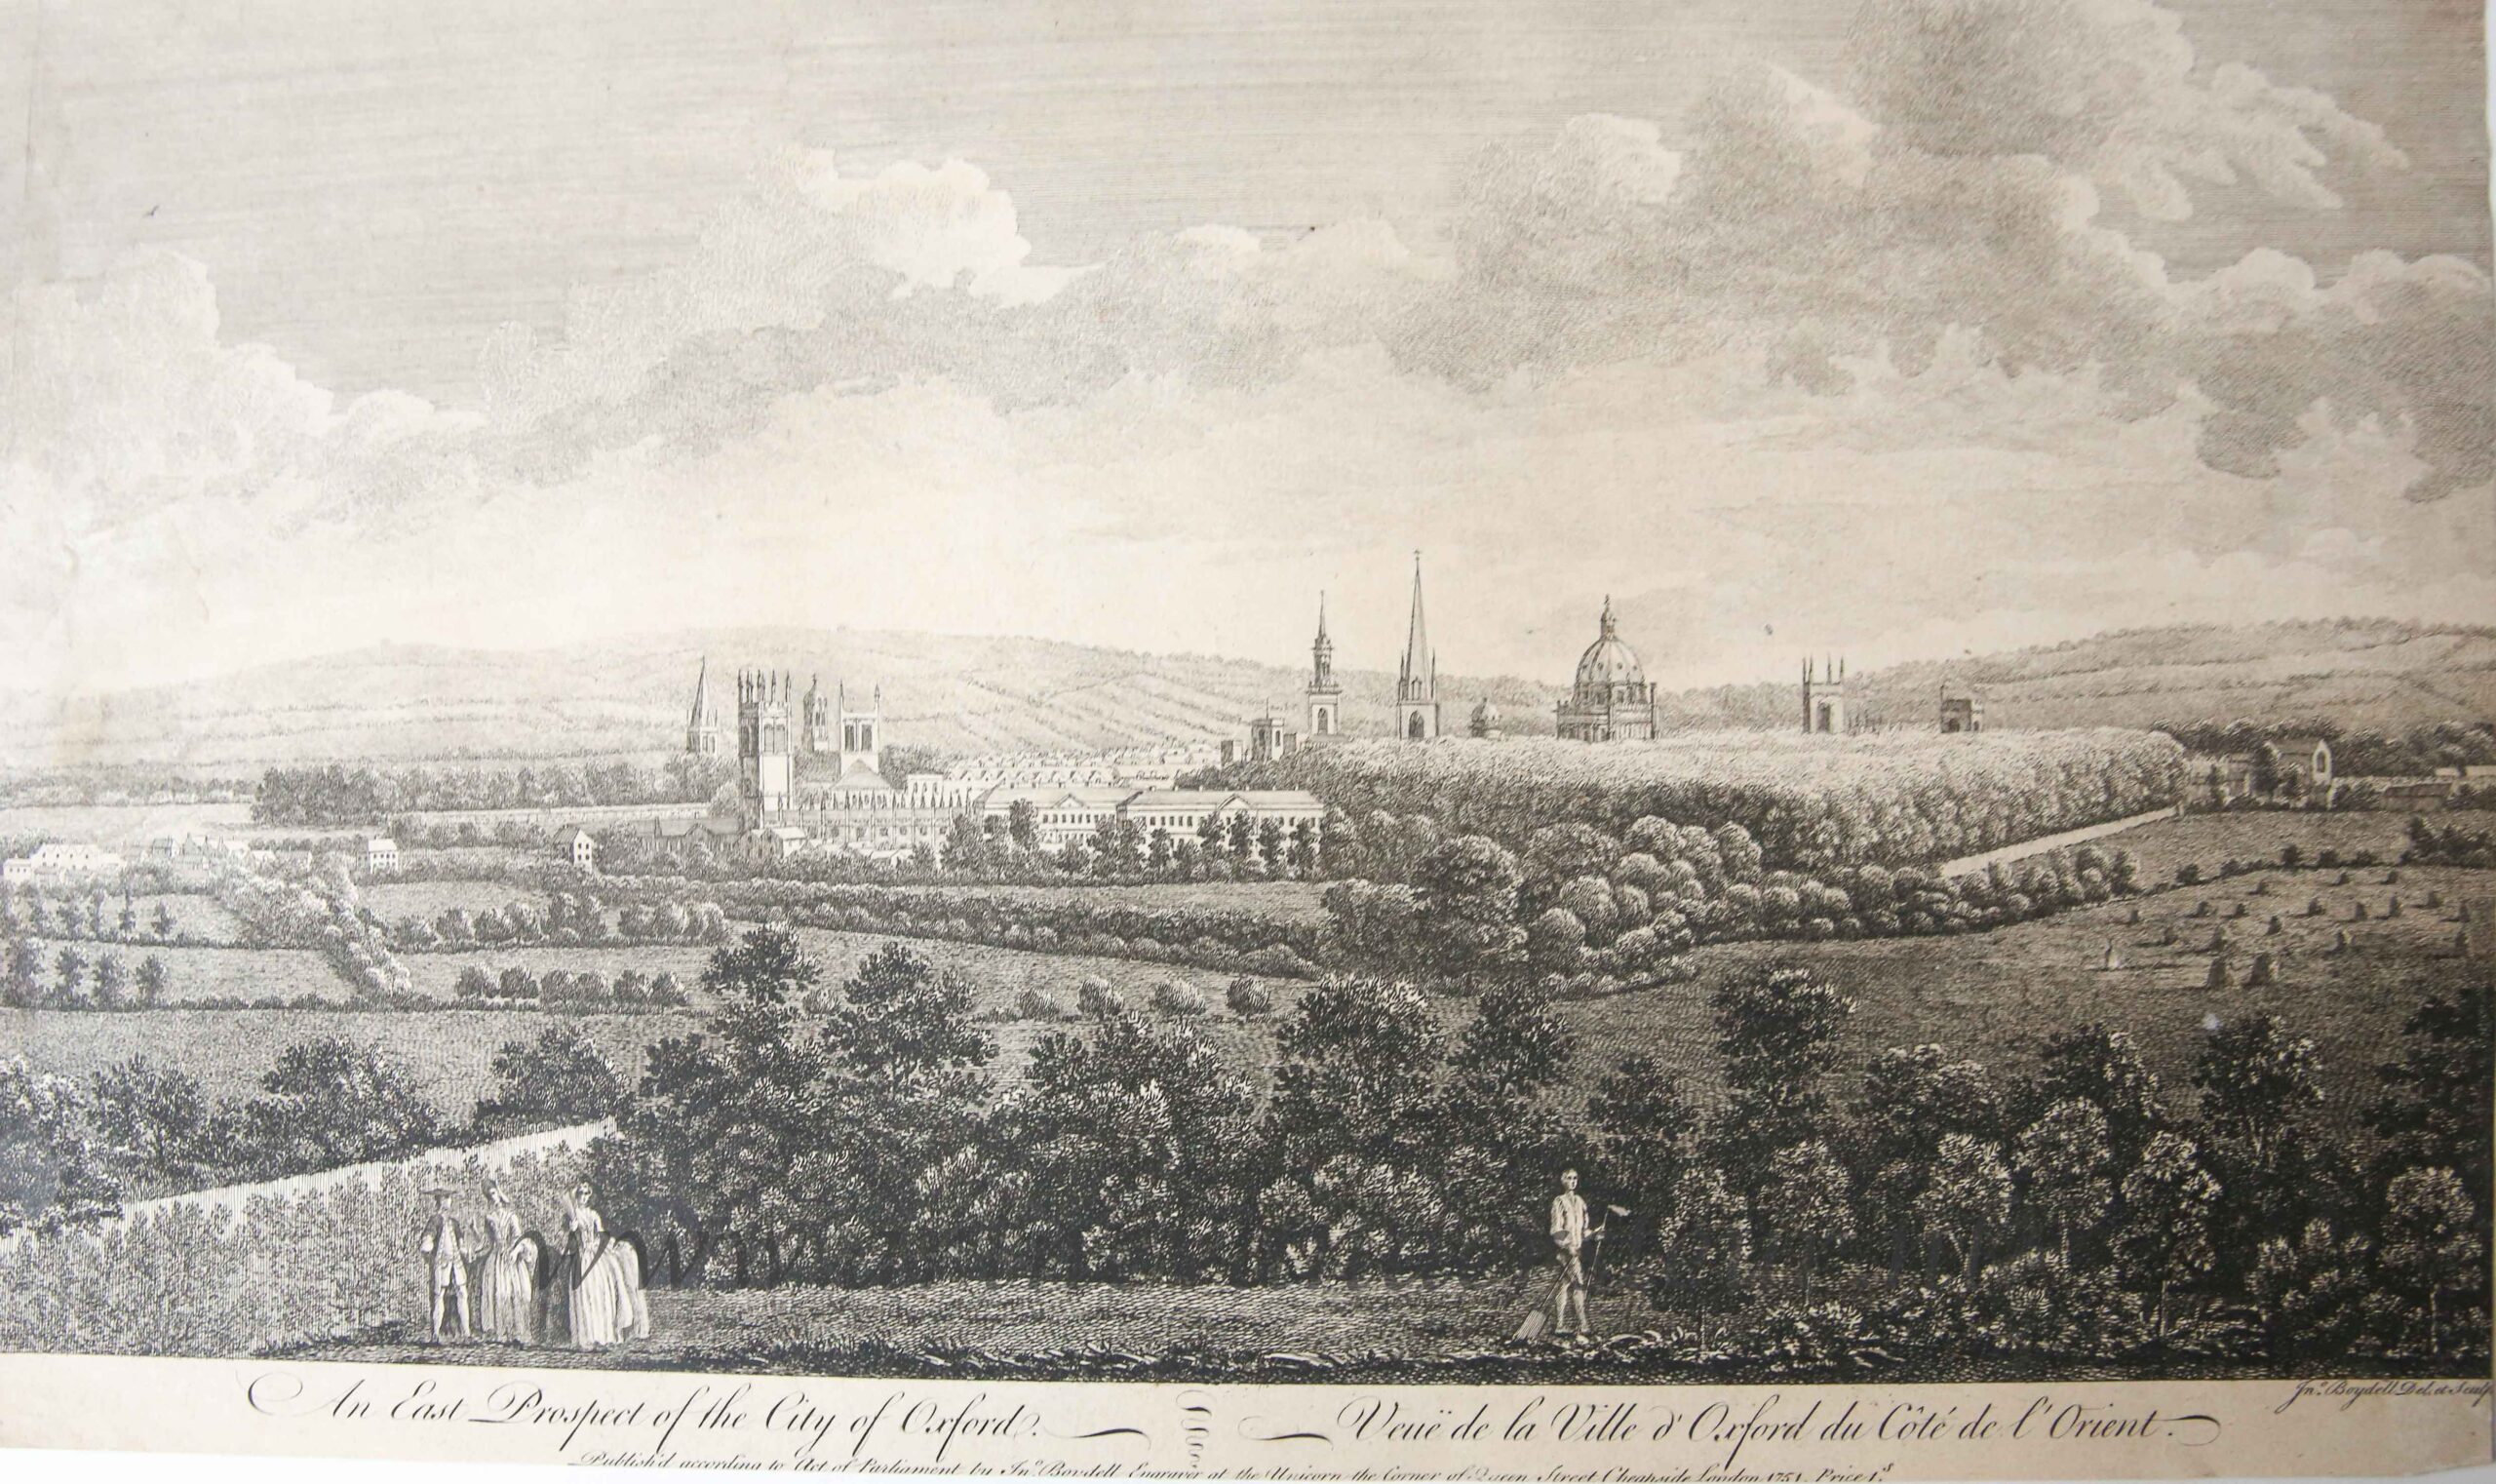 [Antique print, etching and engraving, 1751] An East Prospect of the City of Oxford, published 1751.